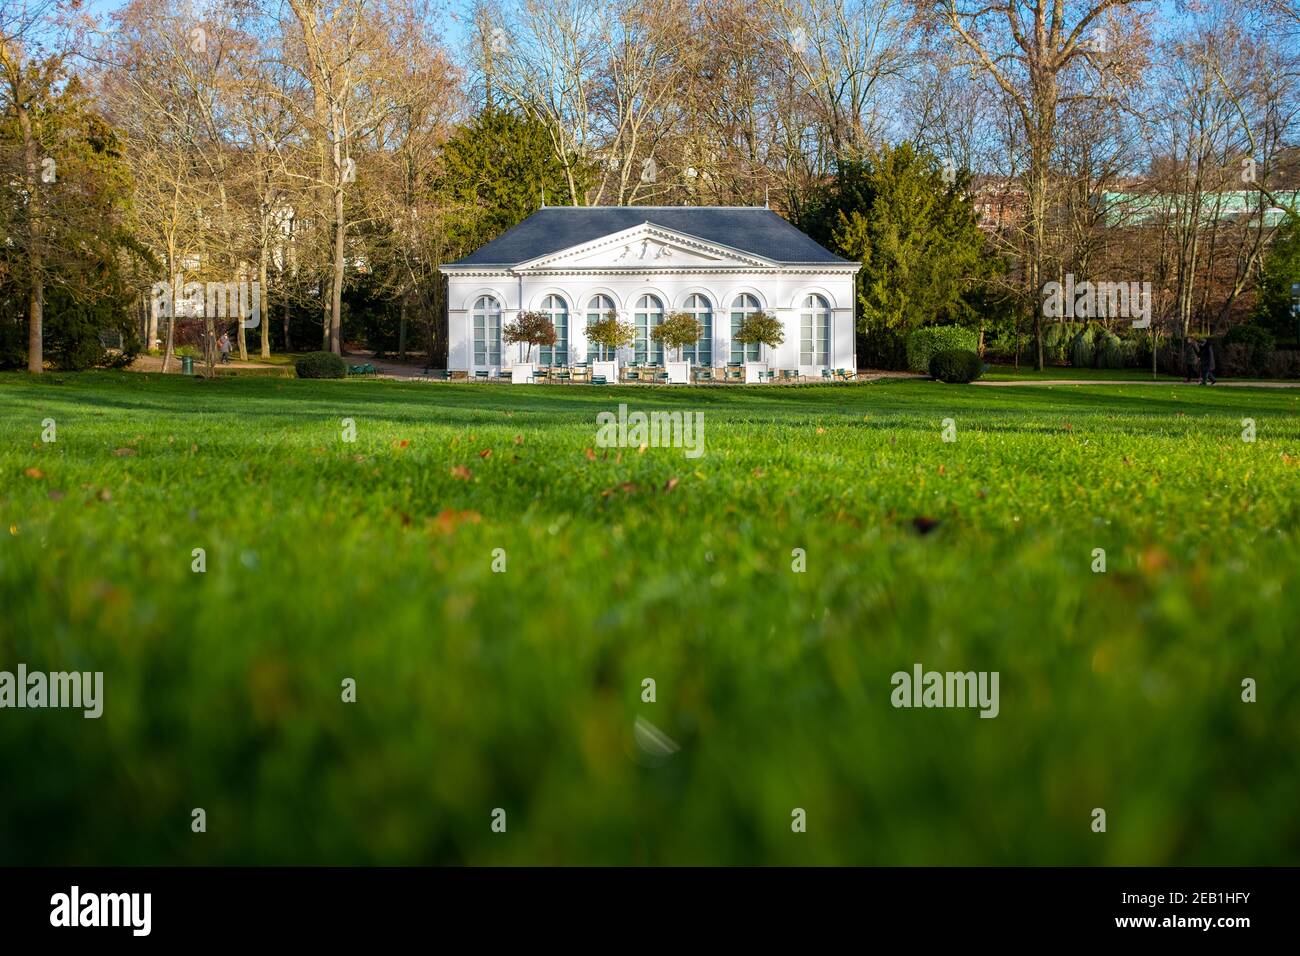 Yerres, France - December 26, 2020: The orangerie located in the garden of the Caillebotte property Stock Photo